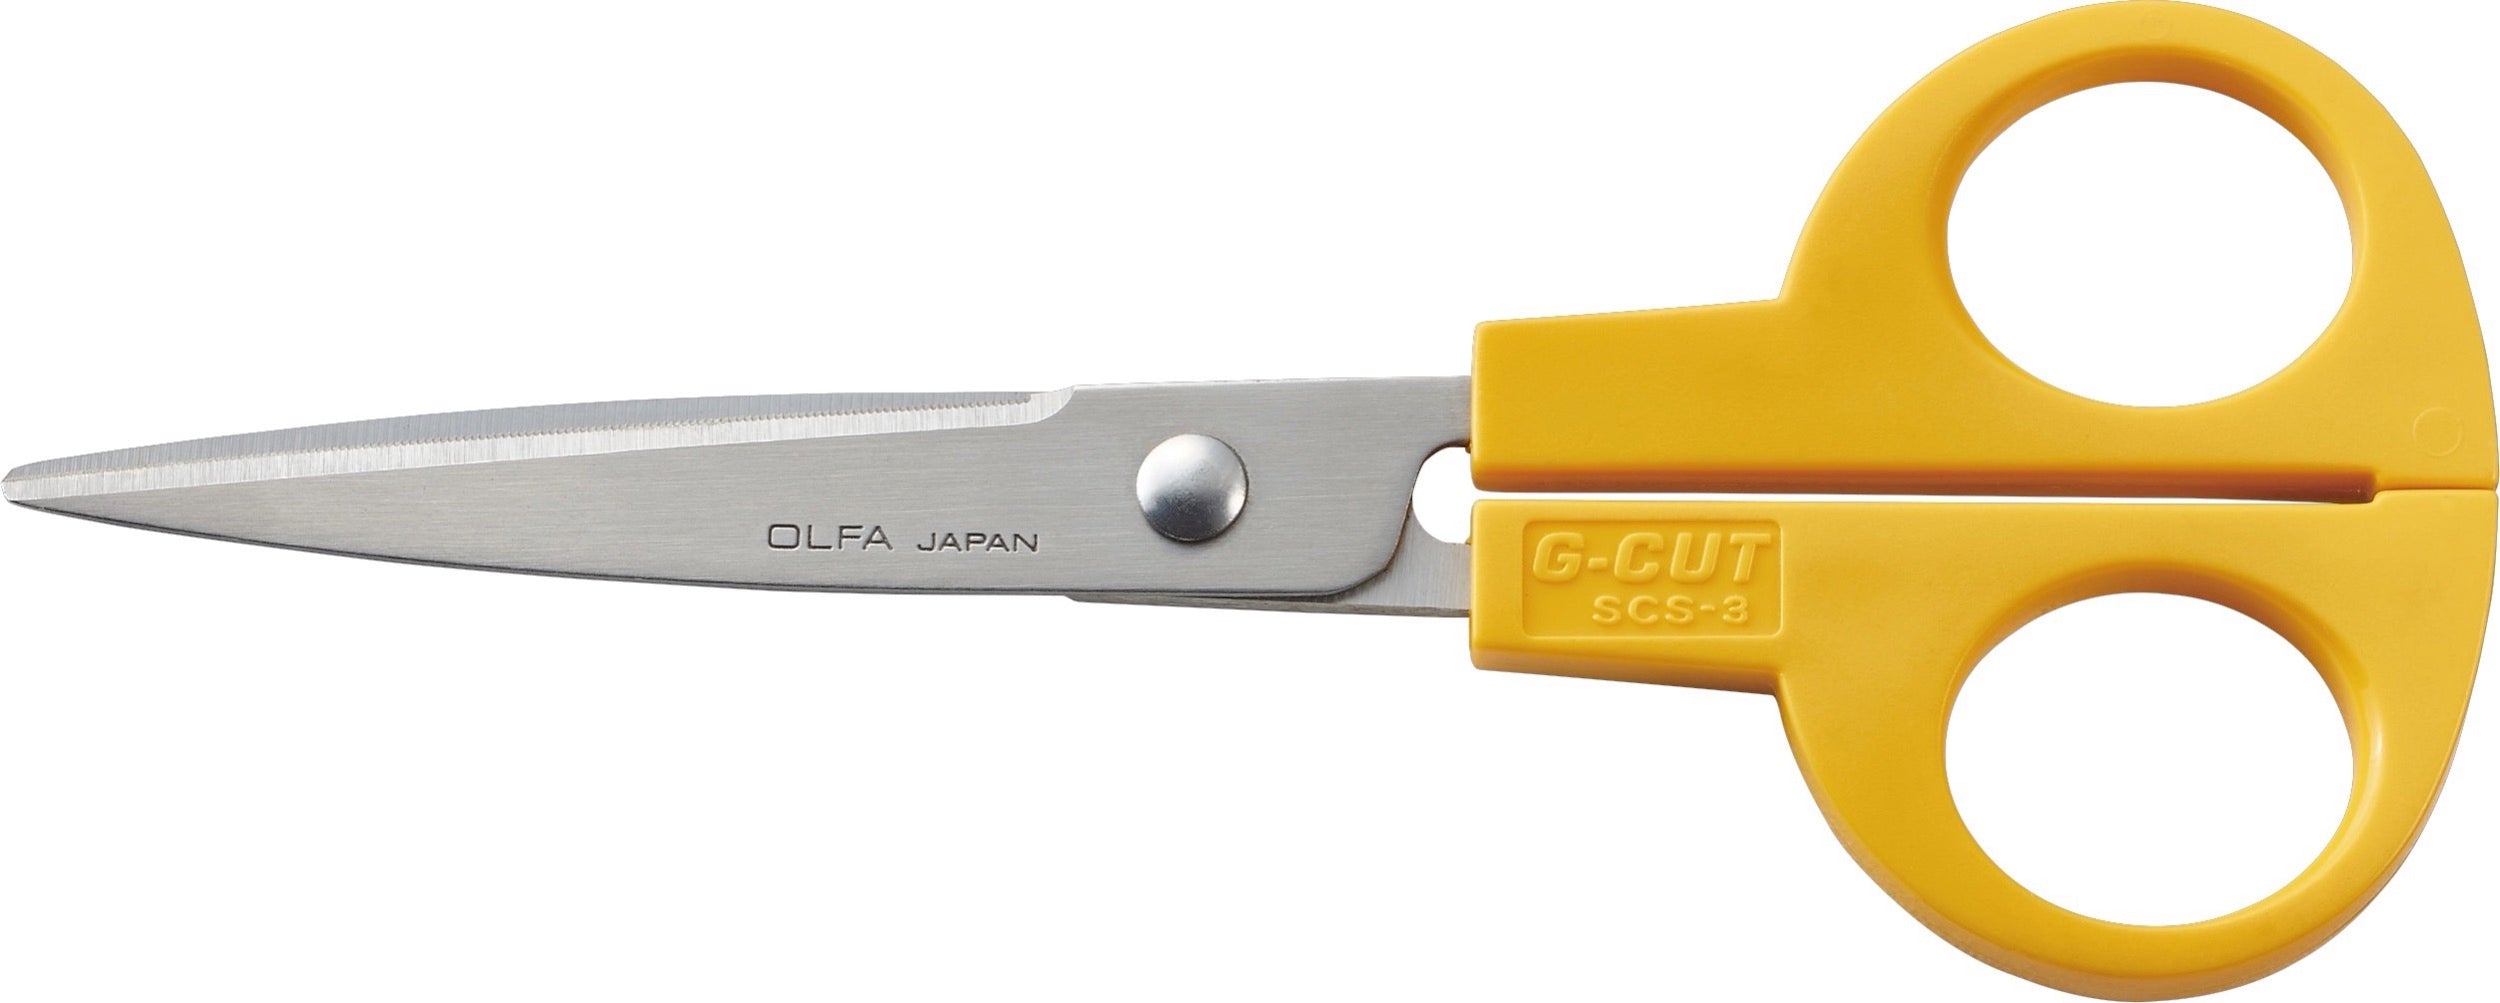 Olfa Scissors SCS-3, a cutting-edge tool that elevates precision and quality. Crafted with utmost care, these scissors boast exceptionally high-quality stainless steel blades that guarantee meticulous cutting. Whether you're a seasoned crafter or a novice, these scissors provide unmatched accuracy.